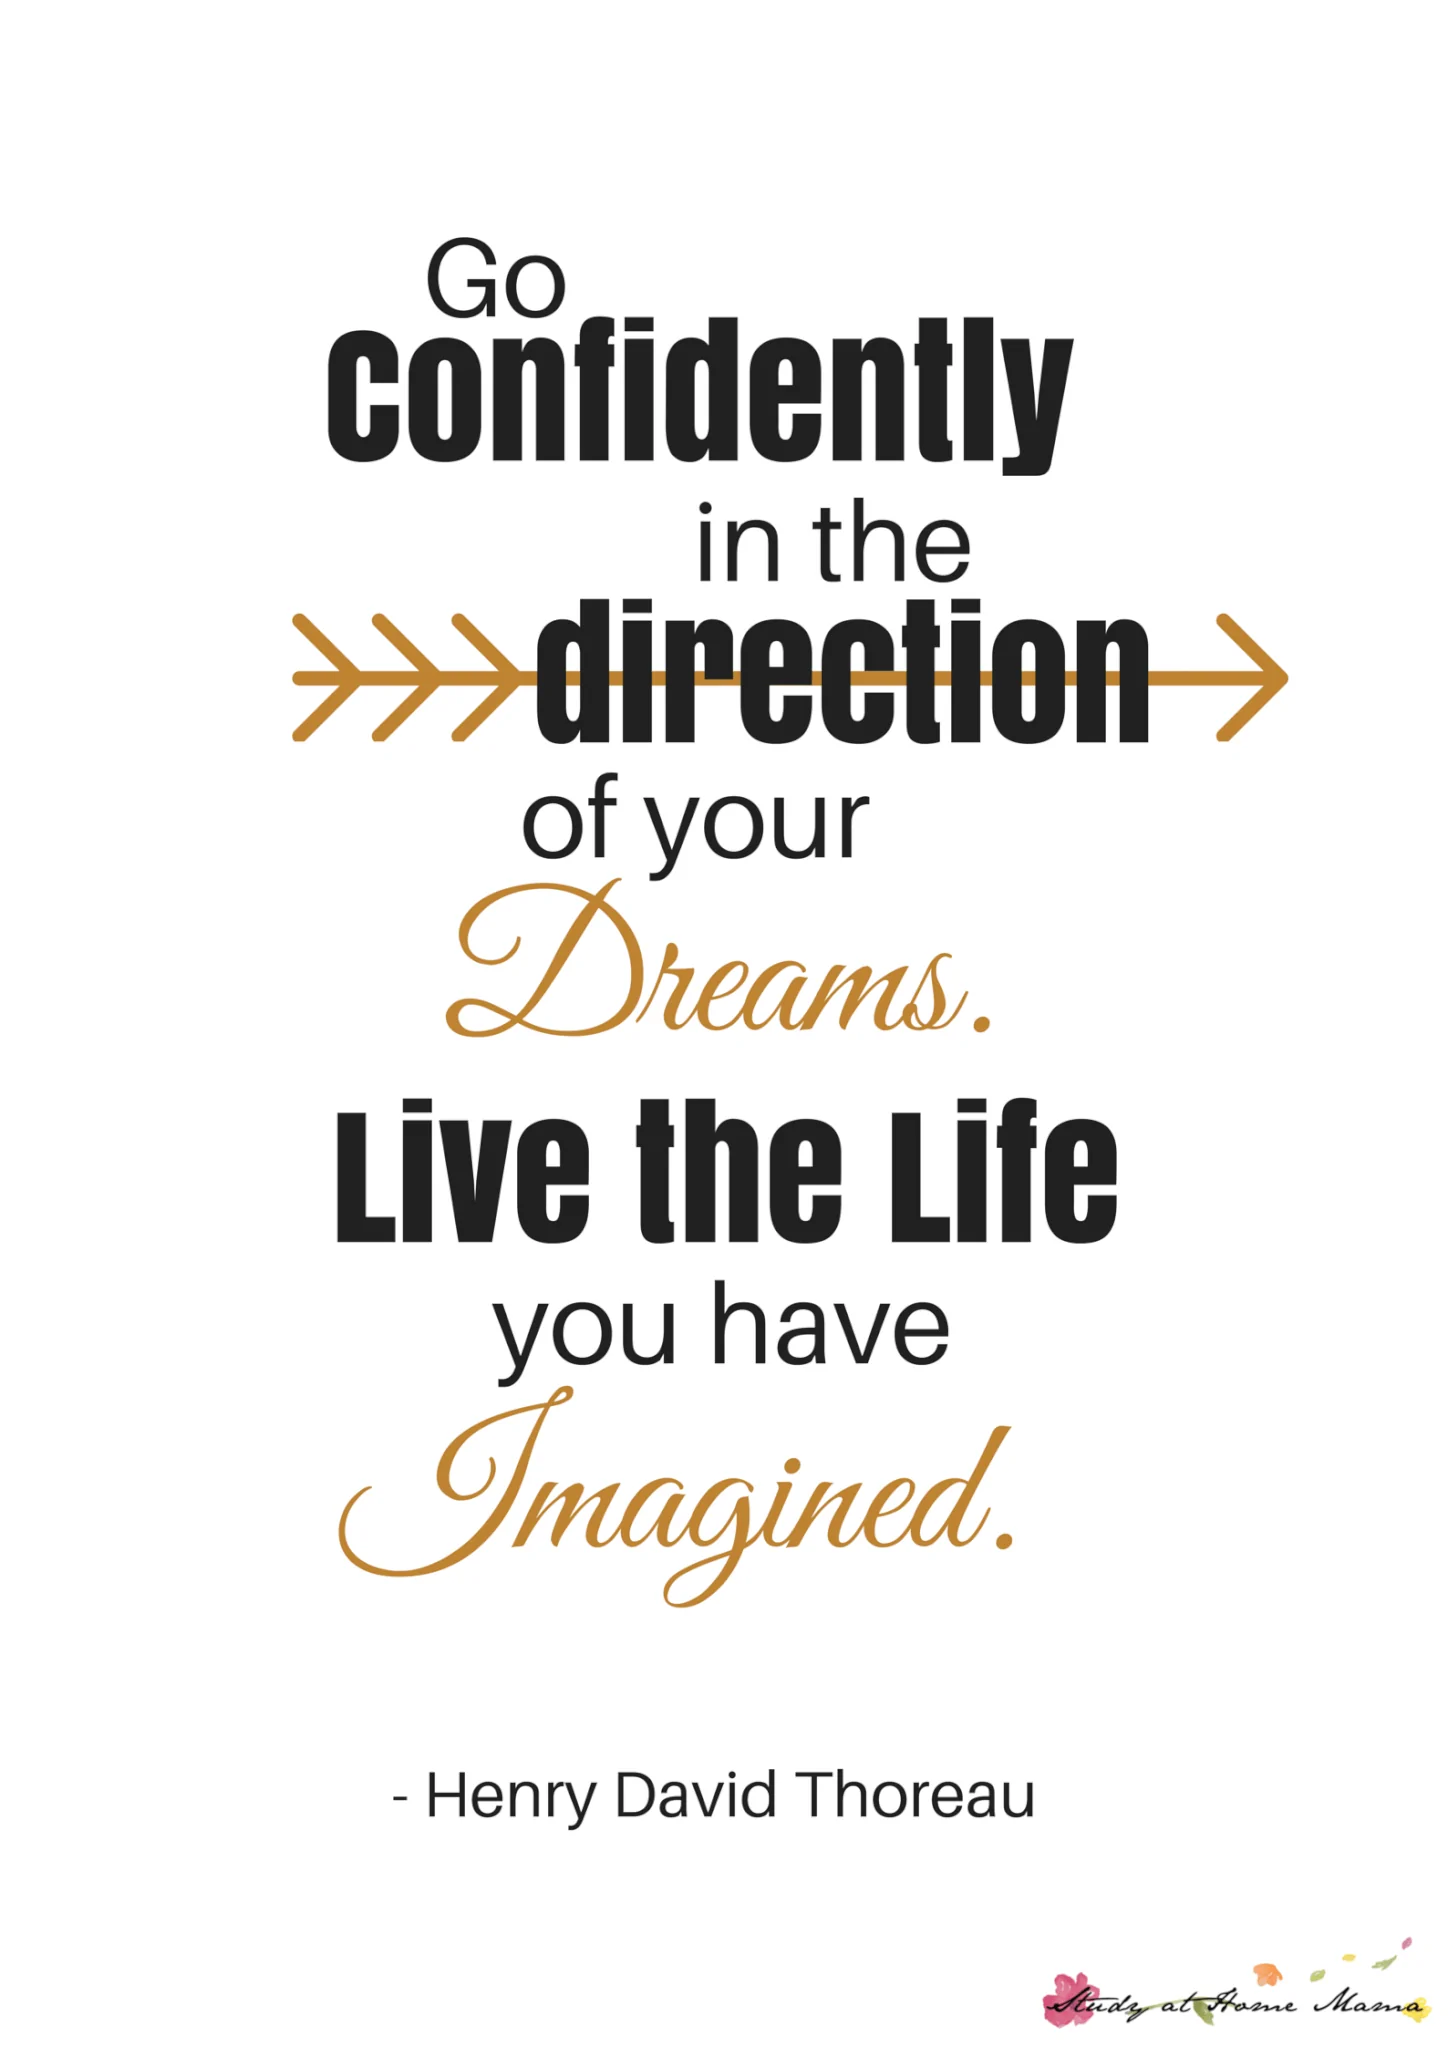 GO CONFIDENTLY IN THE DIRECTION OF YOUR DREAMS. LIVE THE LIFE YOU HAVE IMAGINED. HENRY DAVID THOREAU PRINTABLE QUOTE POSTER